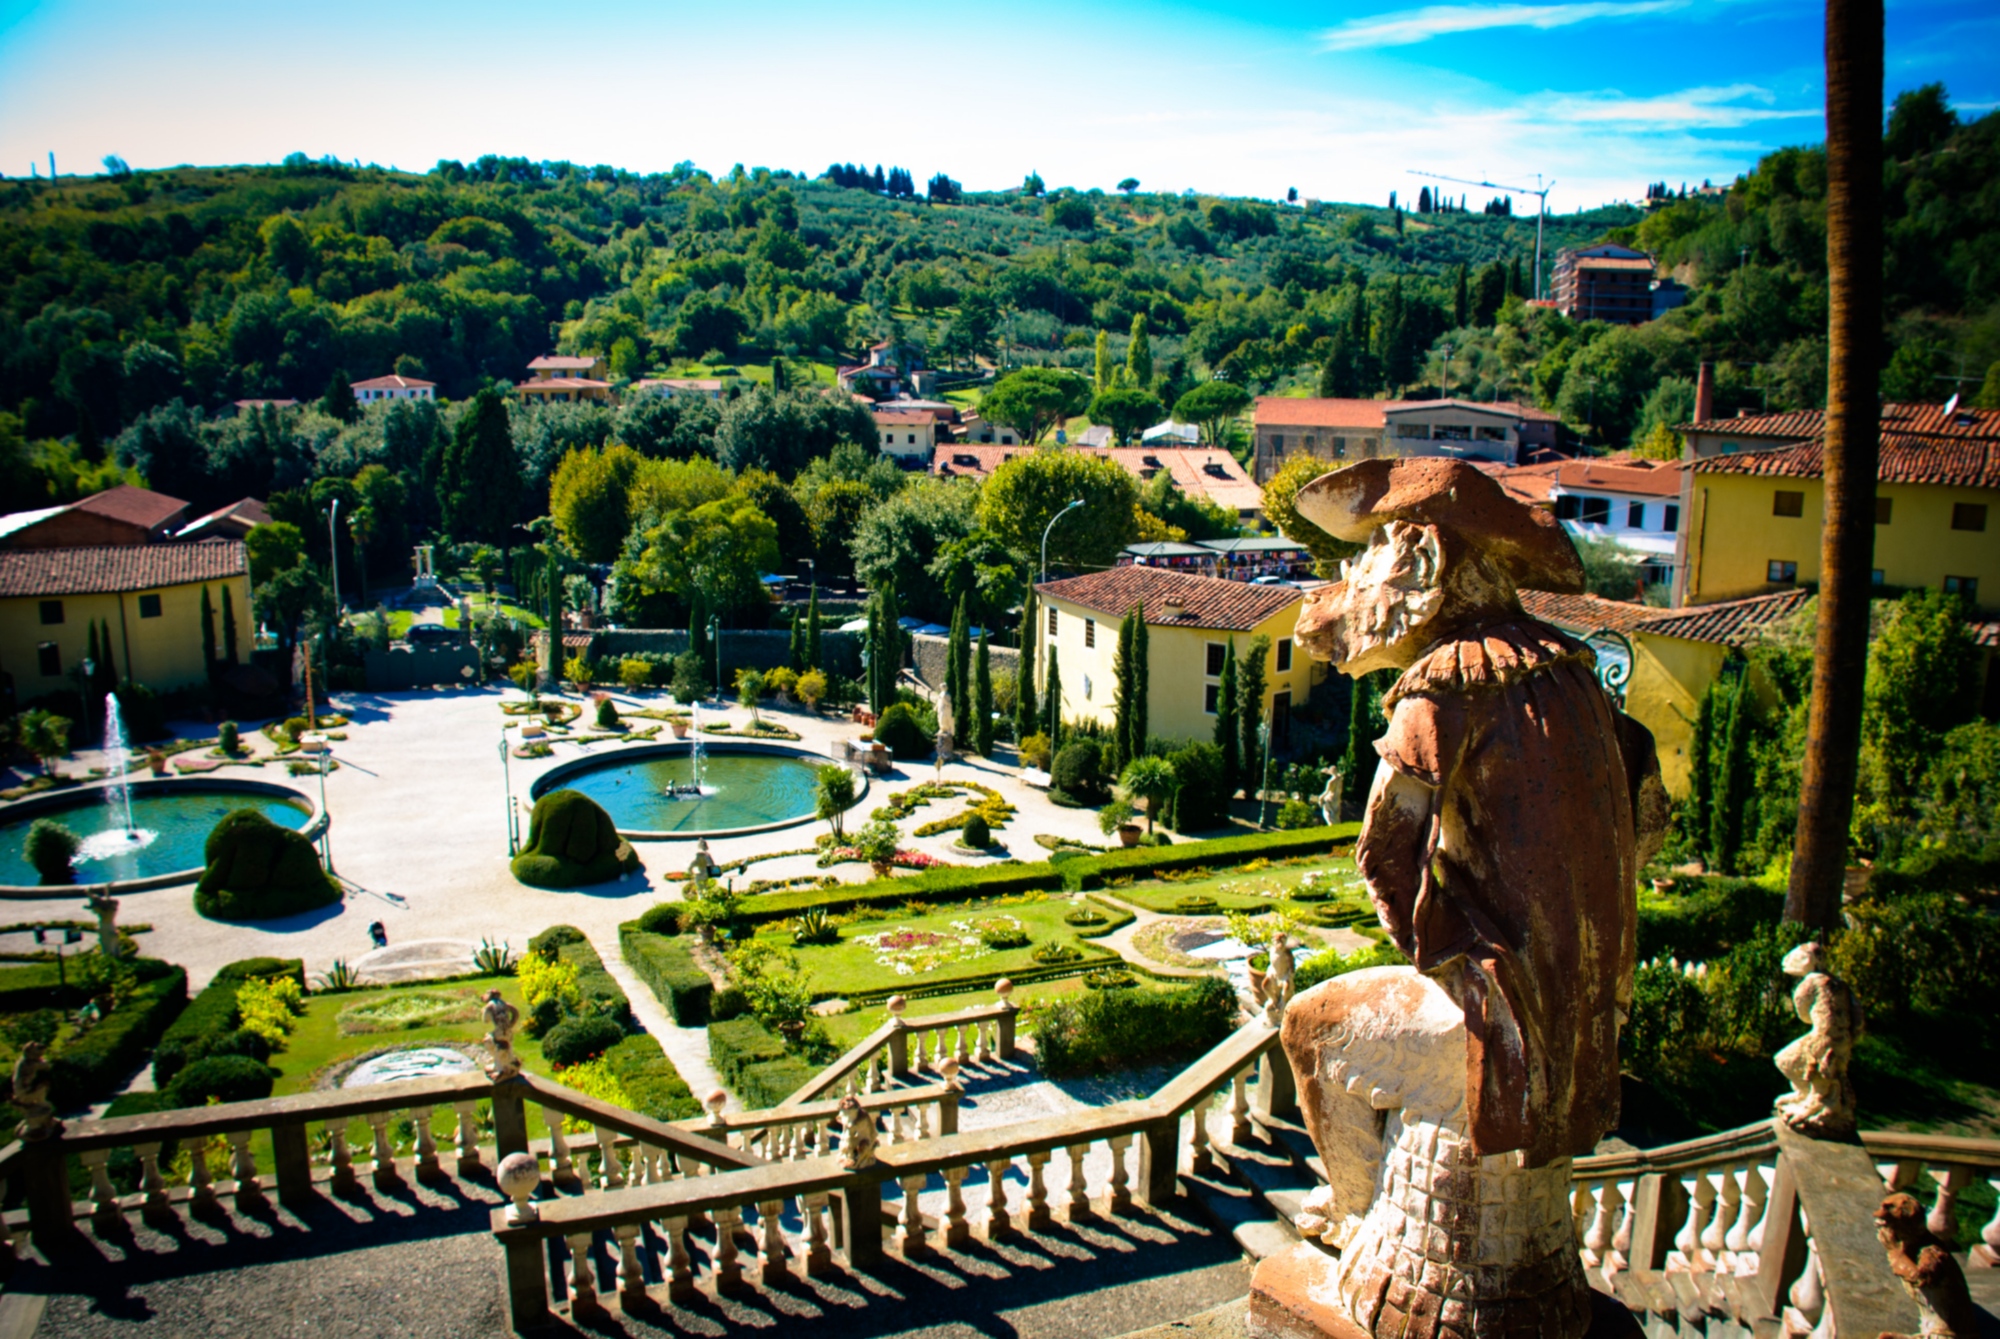 The view from the highest end of Villa Garzoni in Collodi